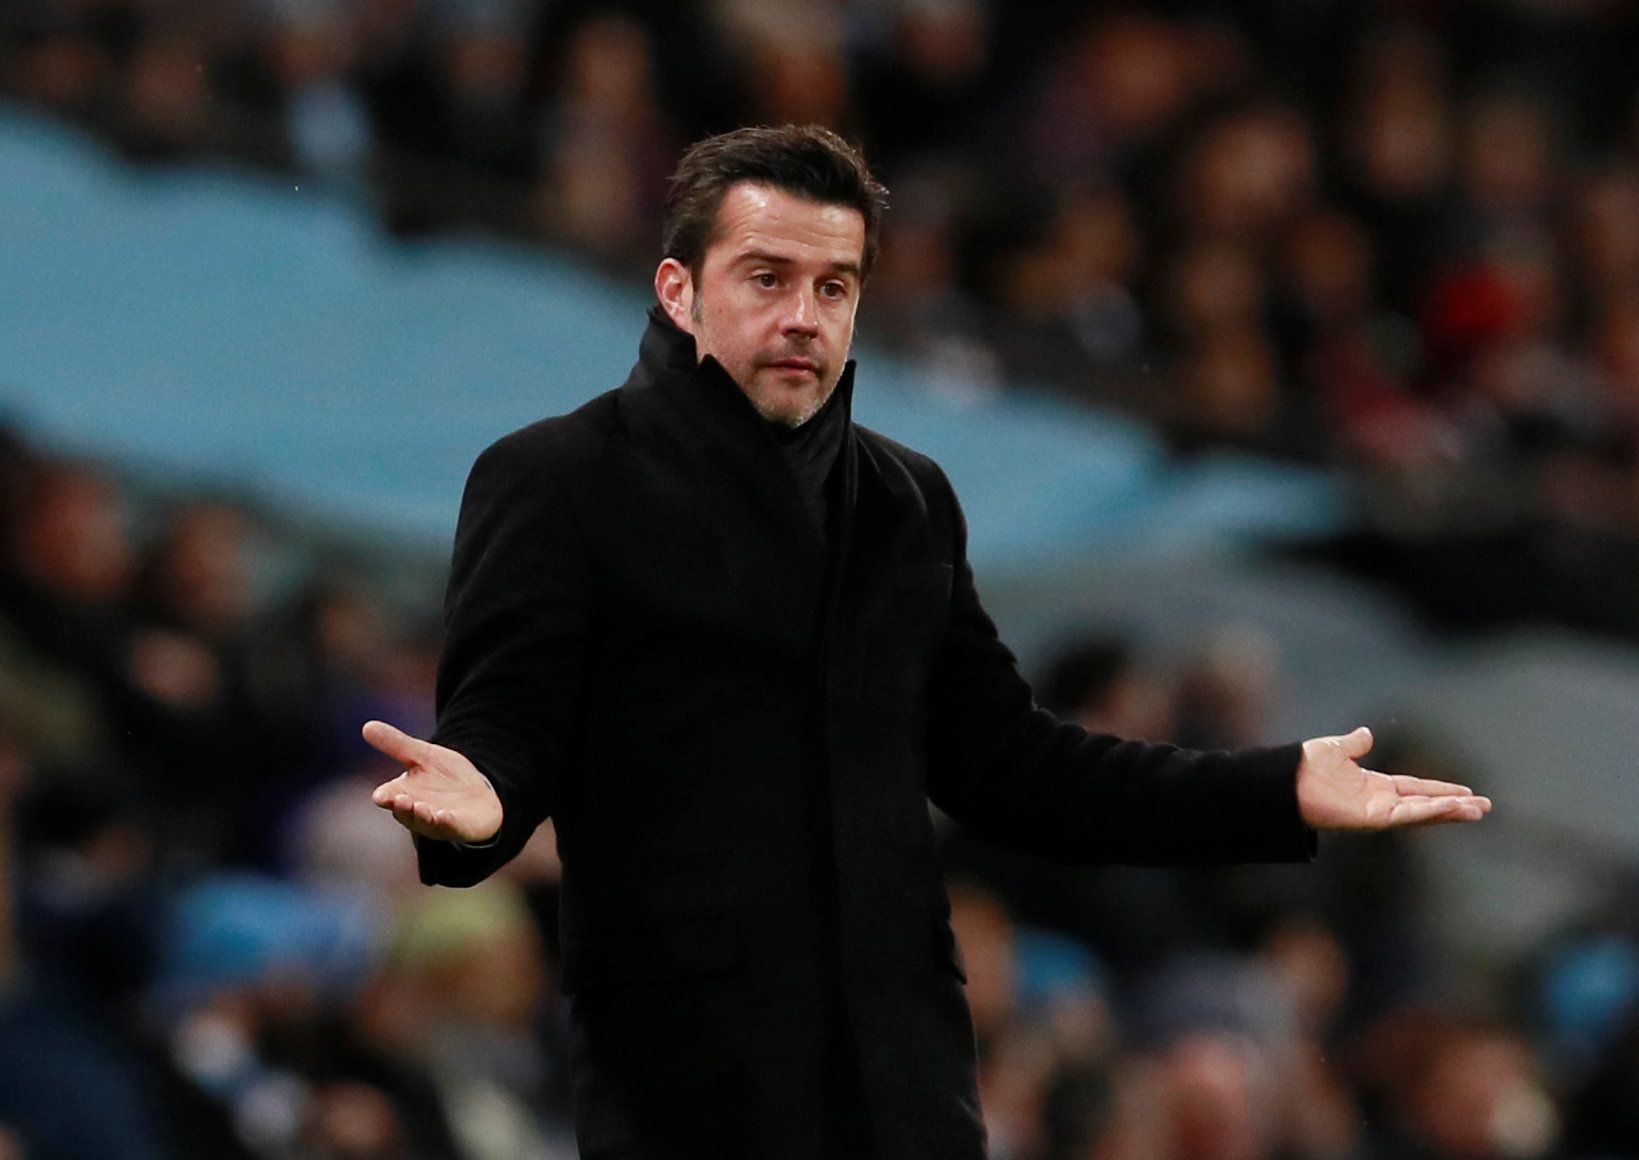 Soccer Football - Premier League - Manchester City vs Watford - Etihad Stadium, Manchester, Britain - January 2, 2018   Watford manager Marco Silva     Action Images via Reuters/Jason Cairnduff    EDITORIAL USE ONLY. No use with unauthorized audio, video, data, fixture lists, club/league logos or "live" services. Online in-match use limited to 75 images, no video emulation. No use in betting, games or single club/league/player publications.  Please contact your account representative for further